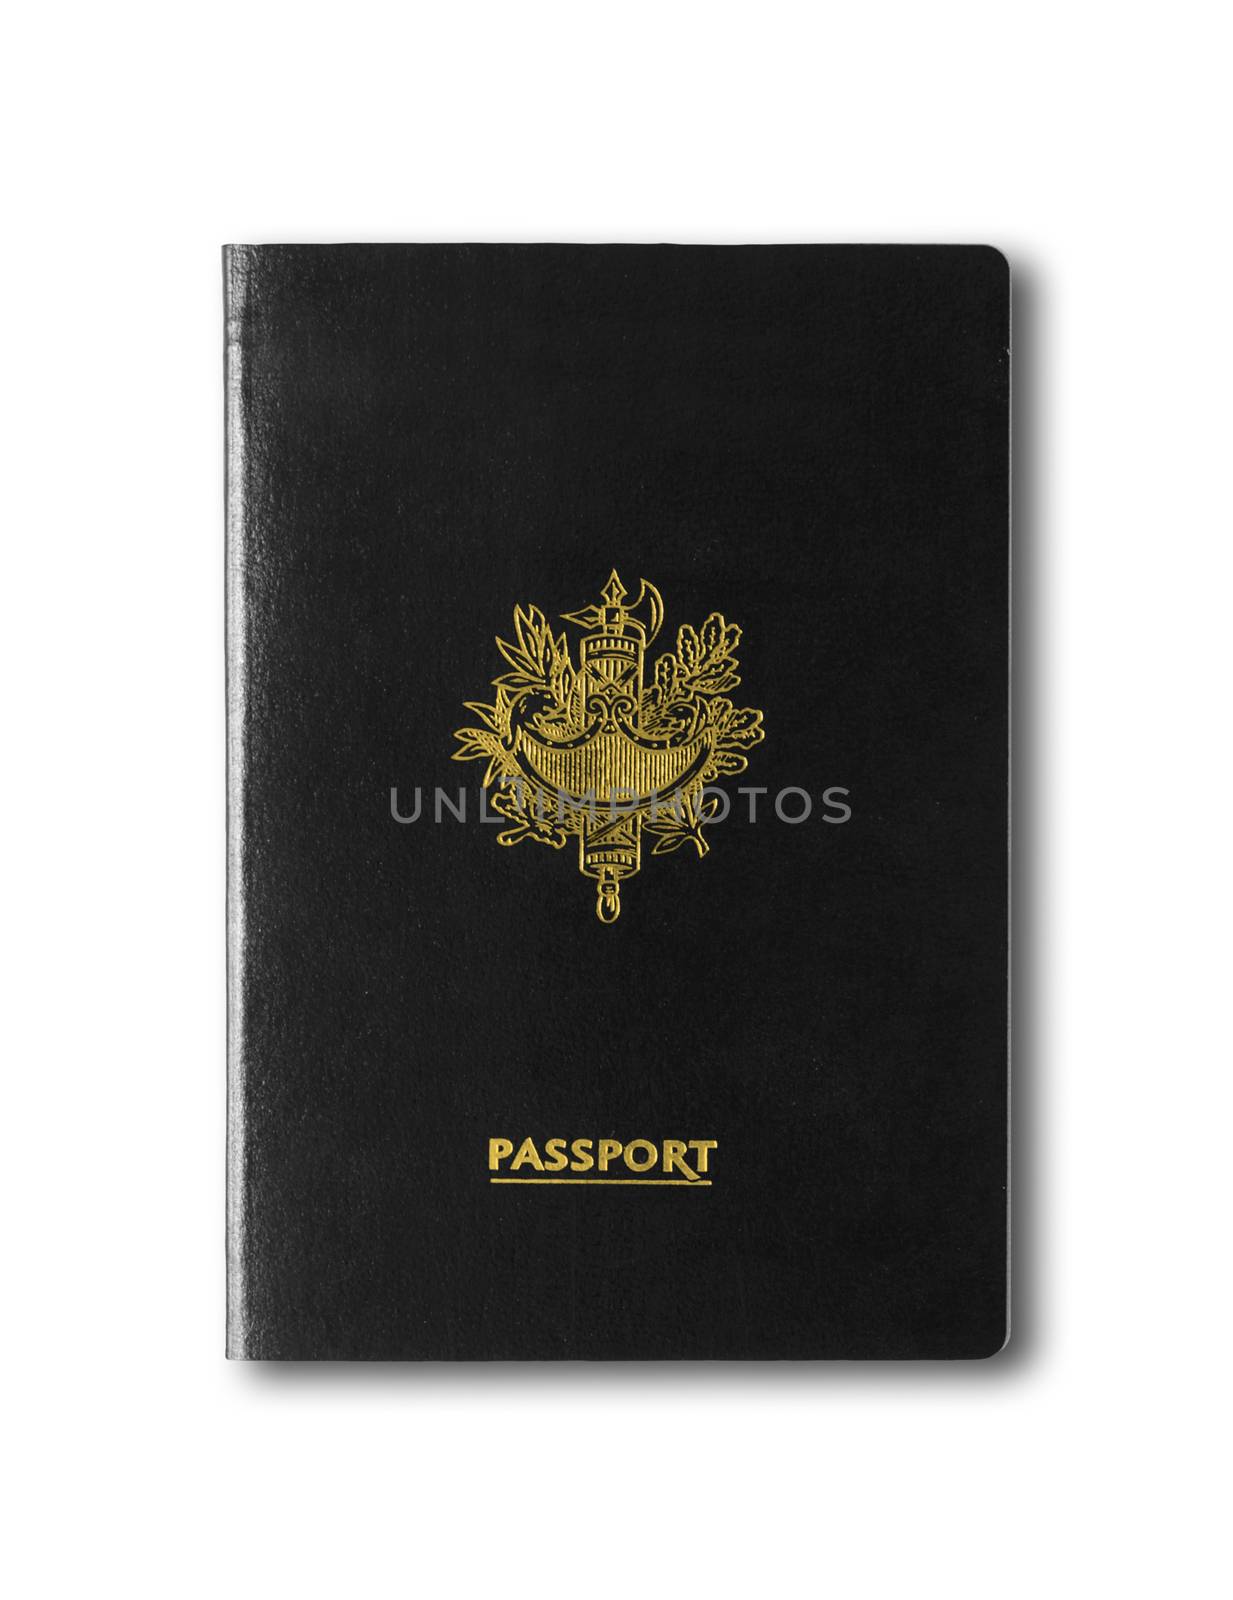 Passport isolated on white background by daboost